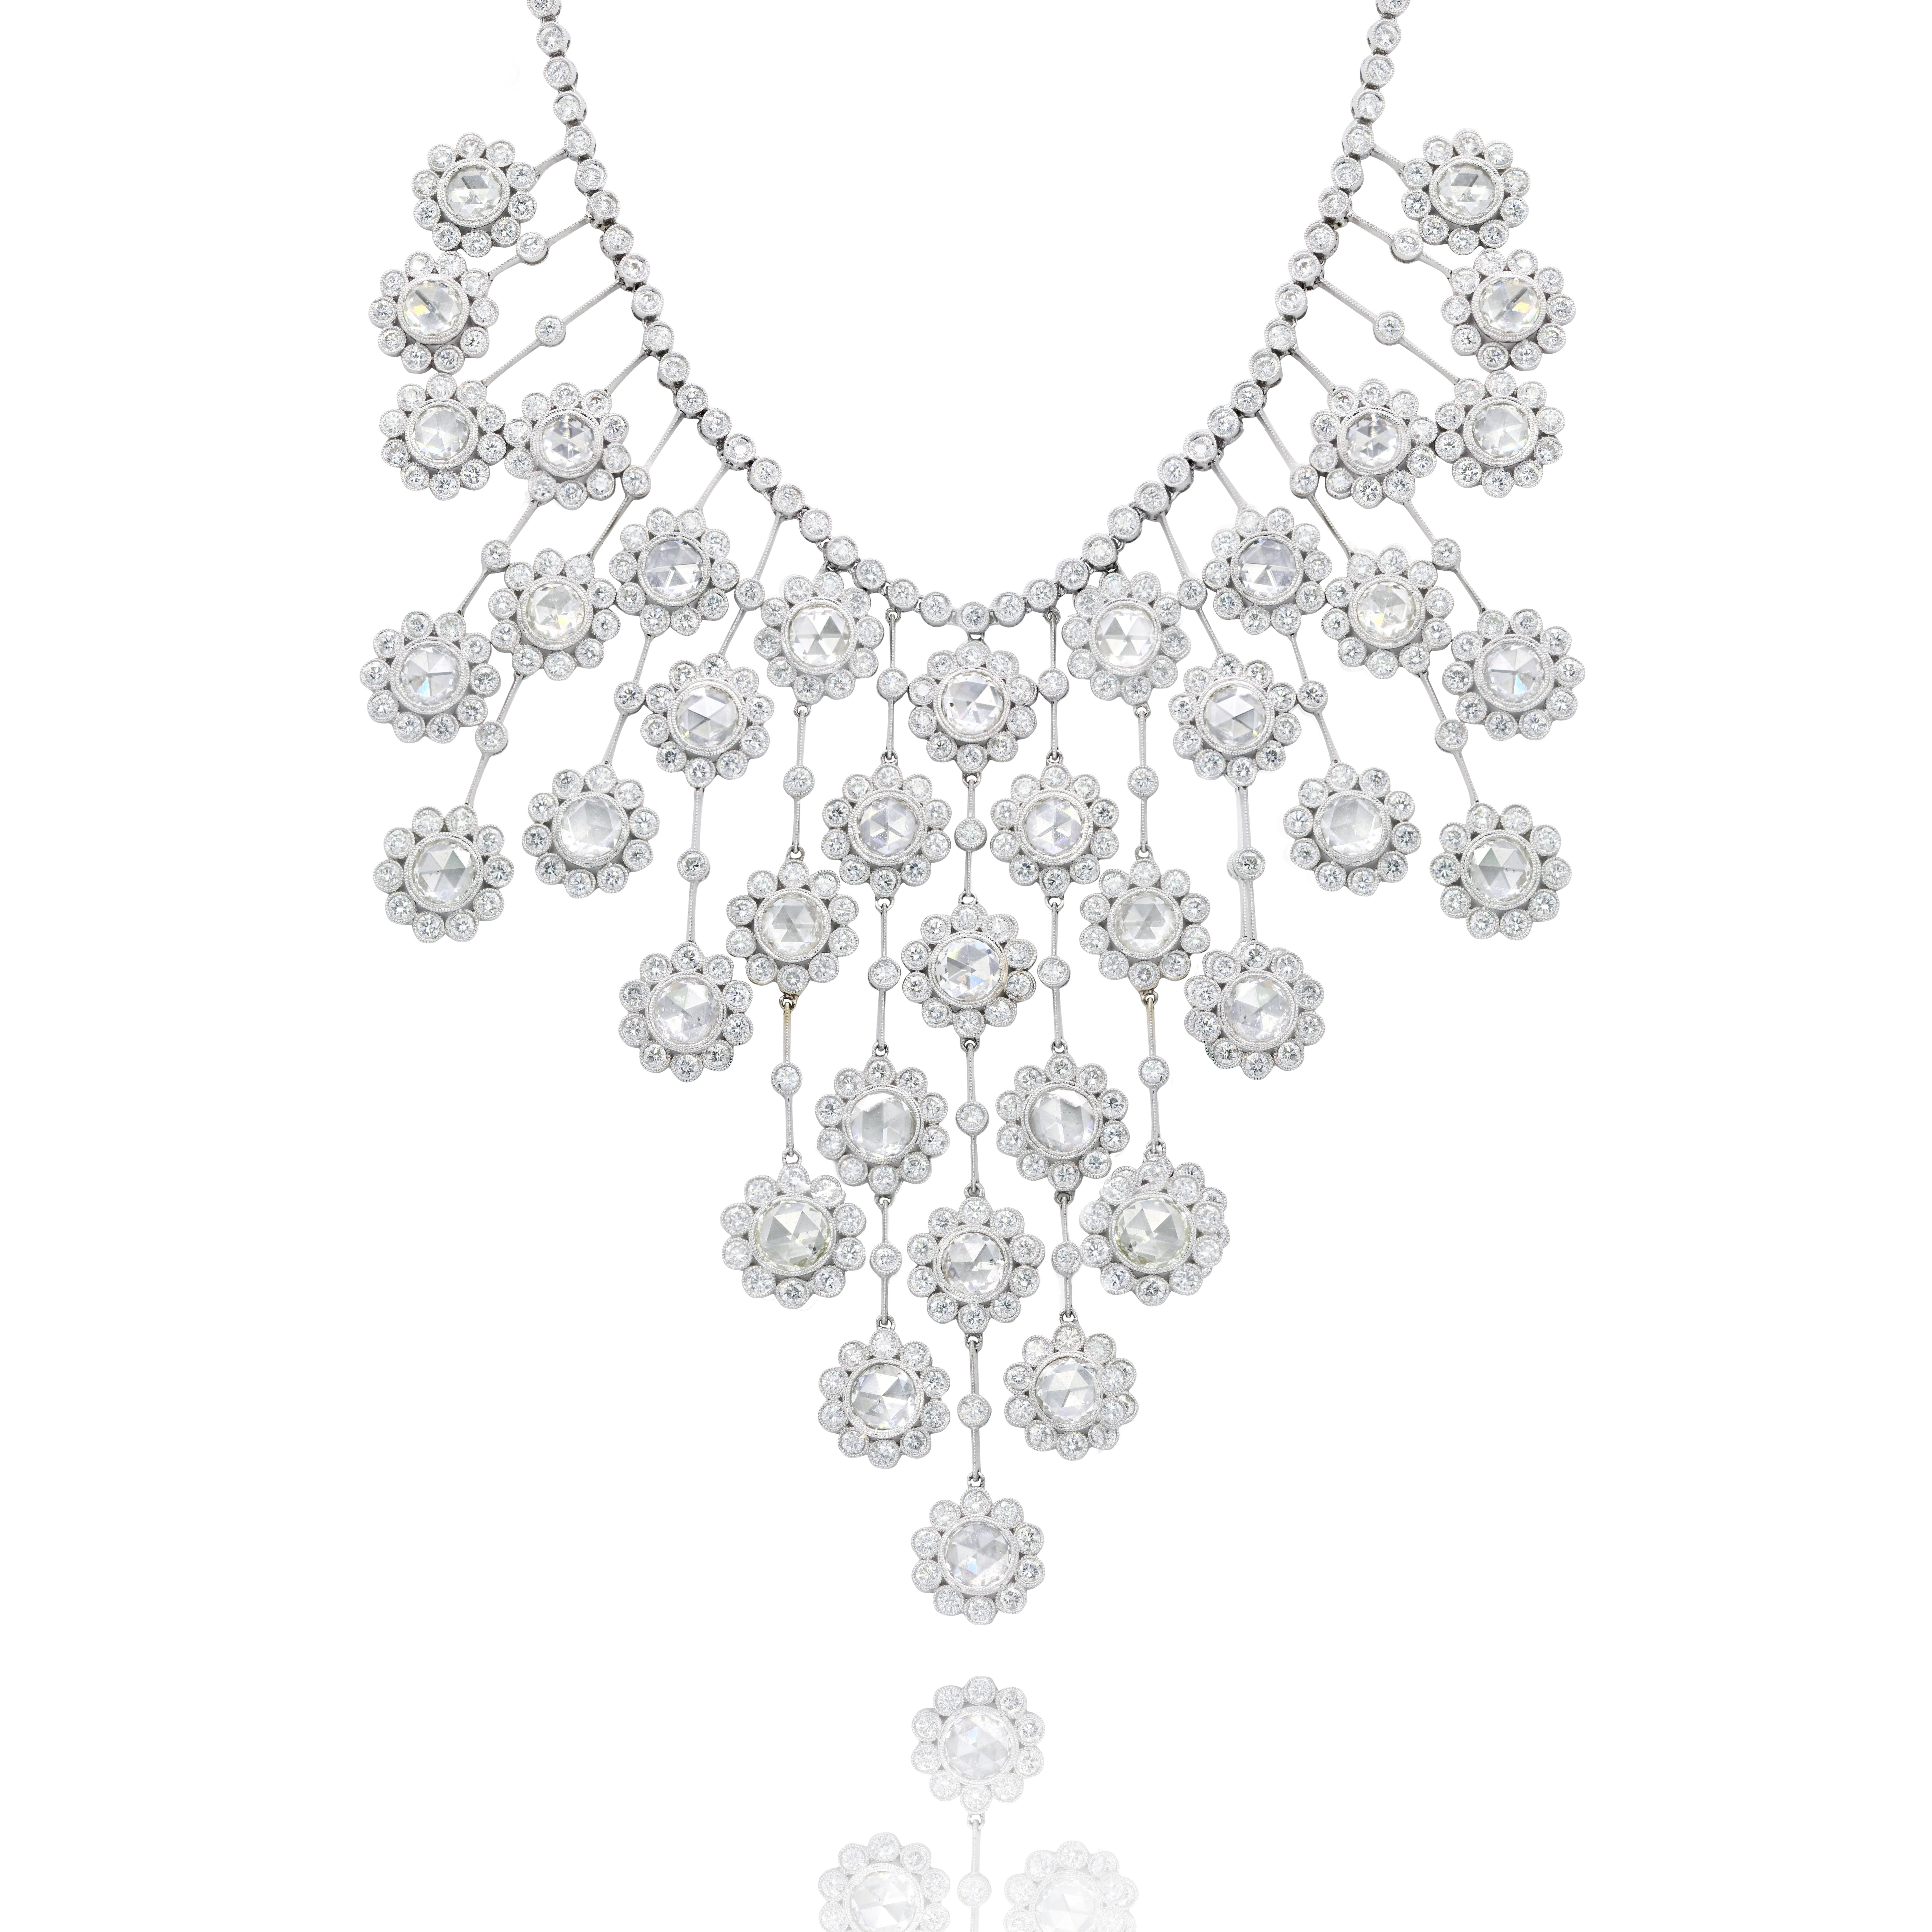 Rose cut Diamond Drop Necklace in 18K White Gold 

18K White gold drop necklace with 50.00 carats of rose cut and round brilliant cut diamonds.
Clasp: hook closure

Diamond specifications:
G-H, VS/SI clarity

This product comes with a certificate of